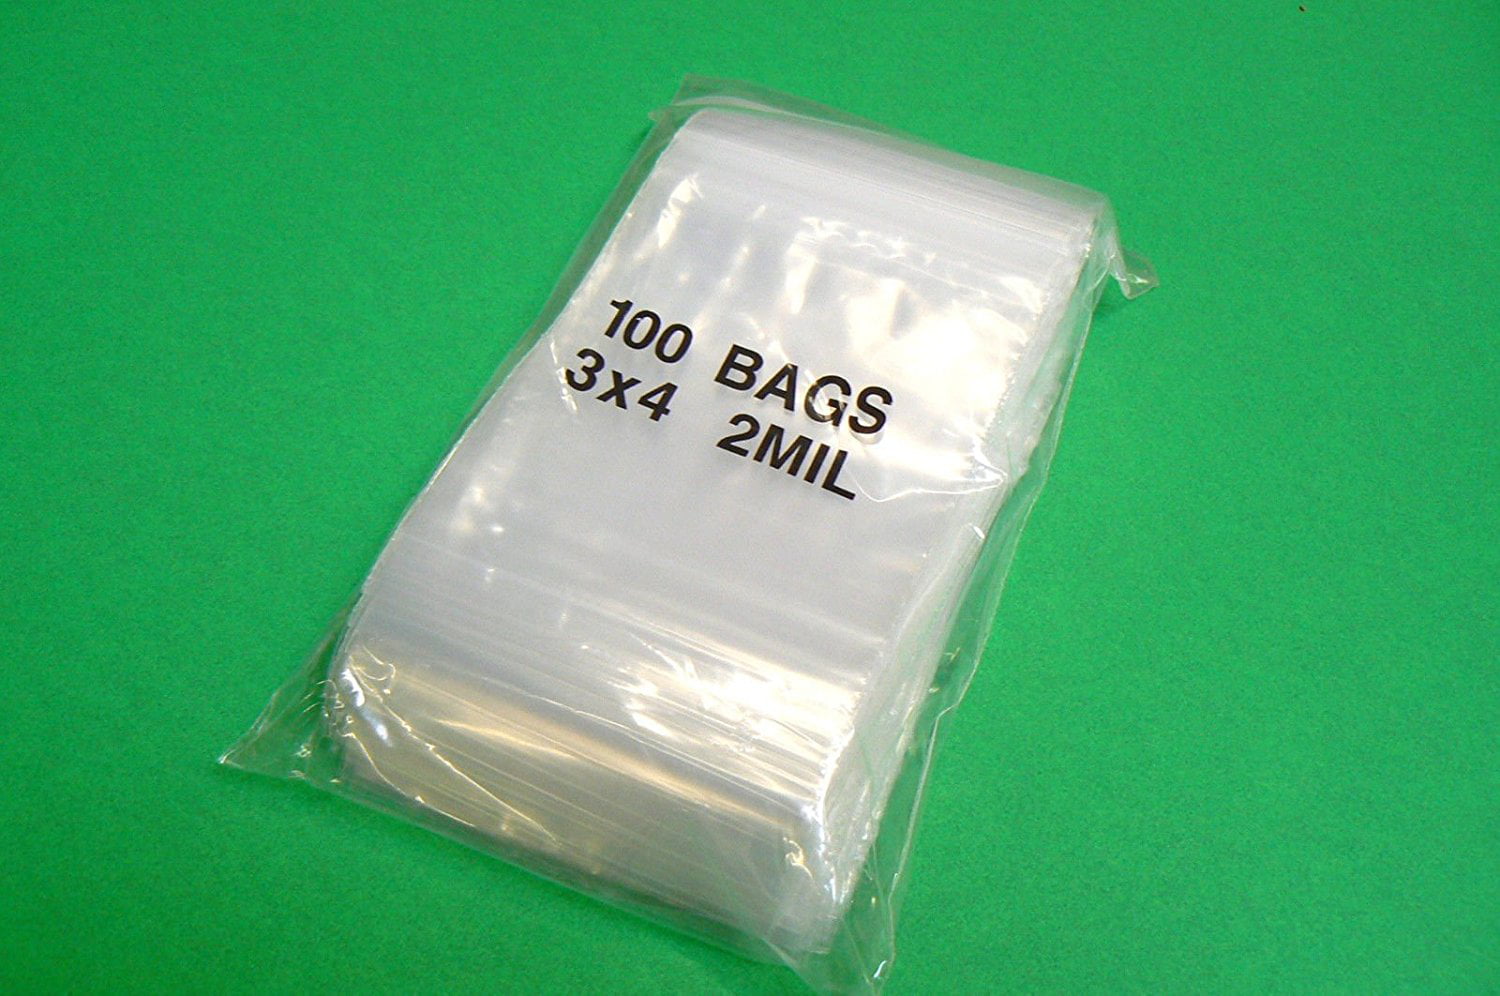 ClearlyBags 3"x4" 2Mil Plastic Reclosable Zip Lock Bags 100 pcs 100